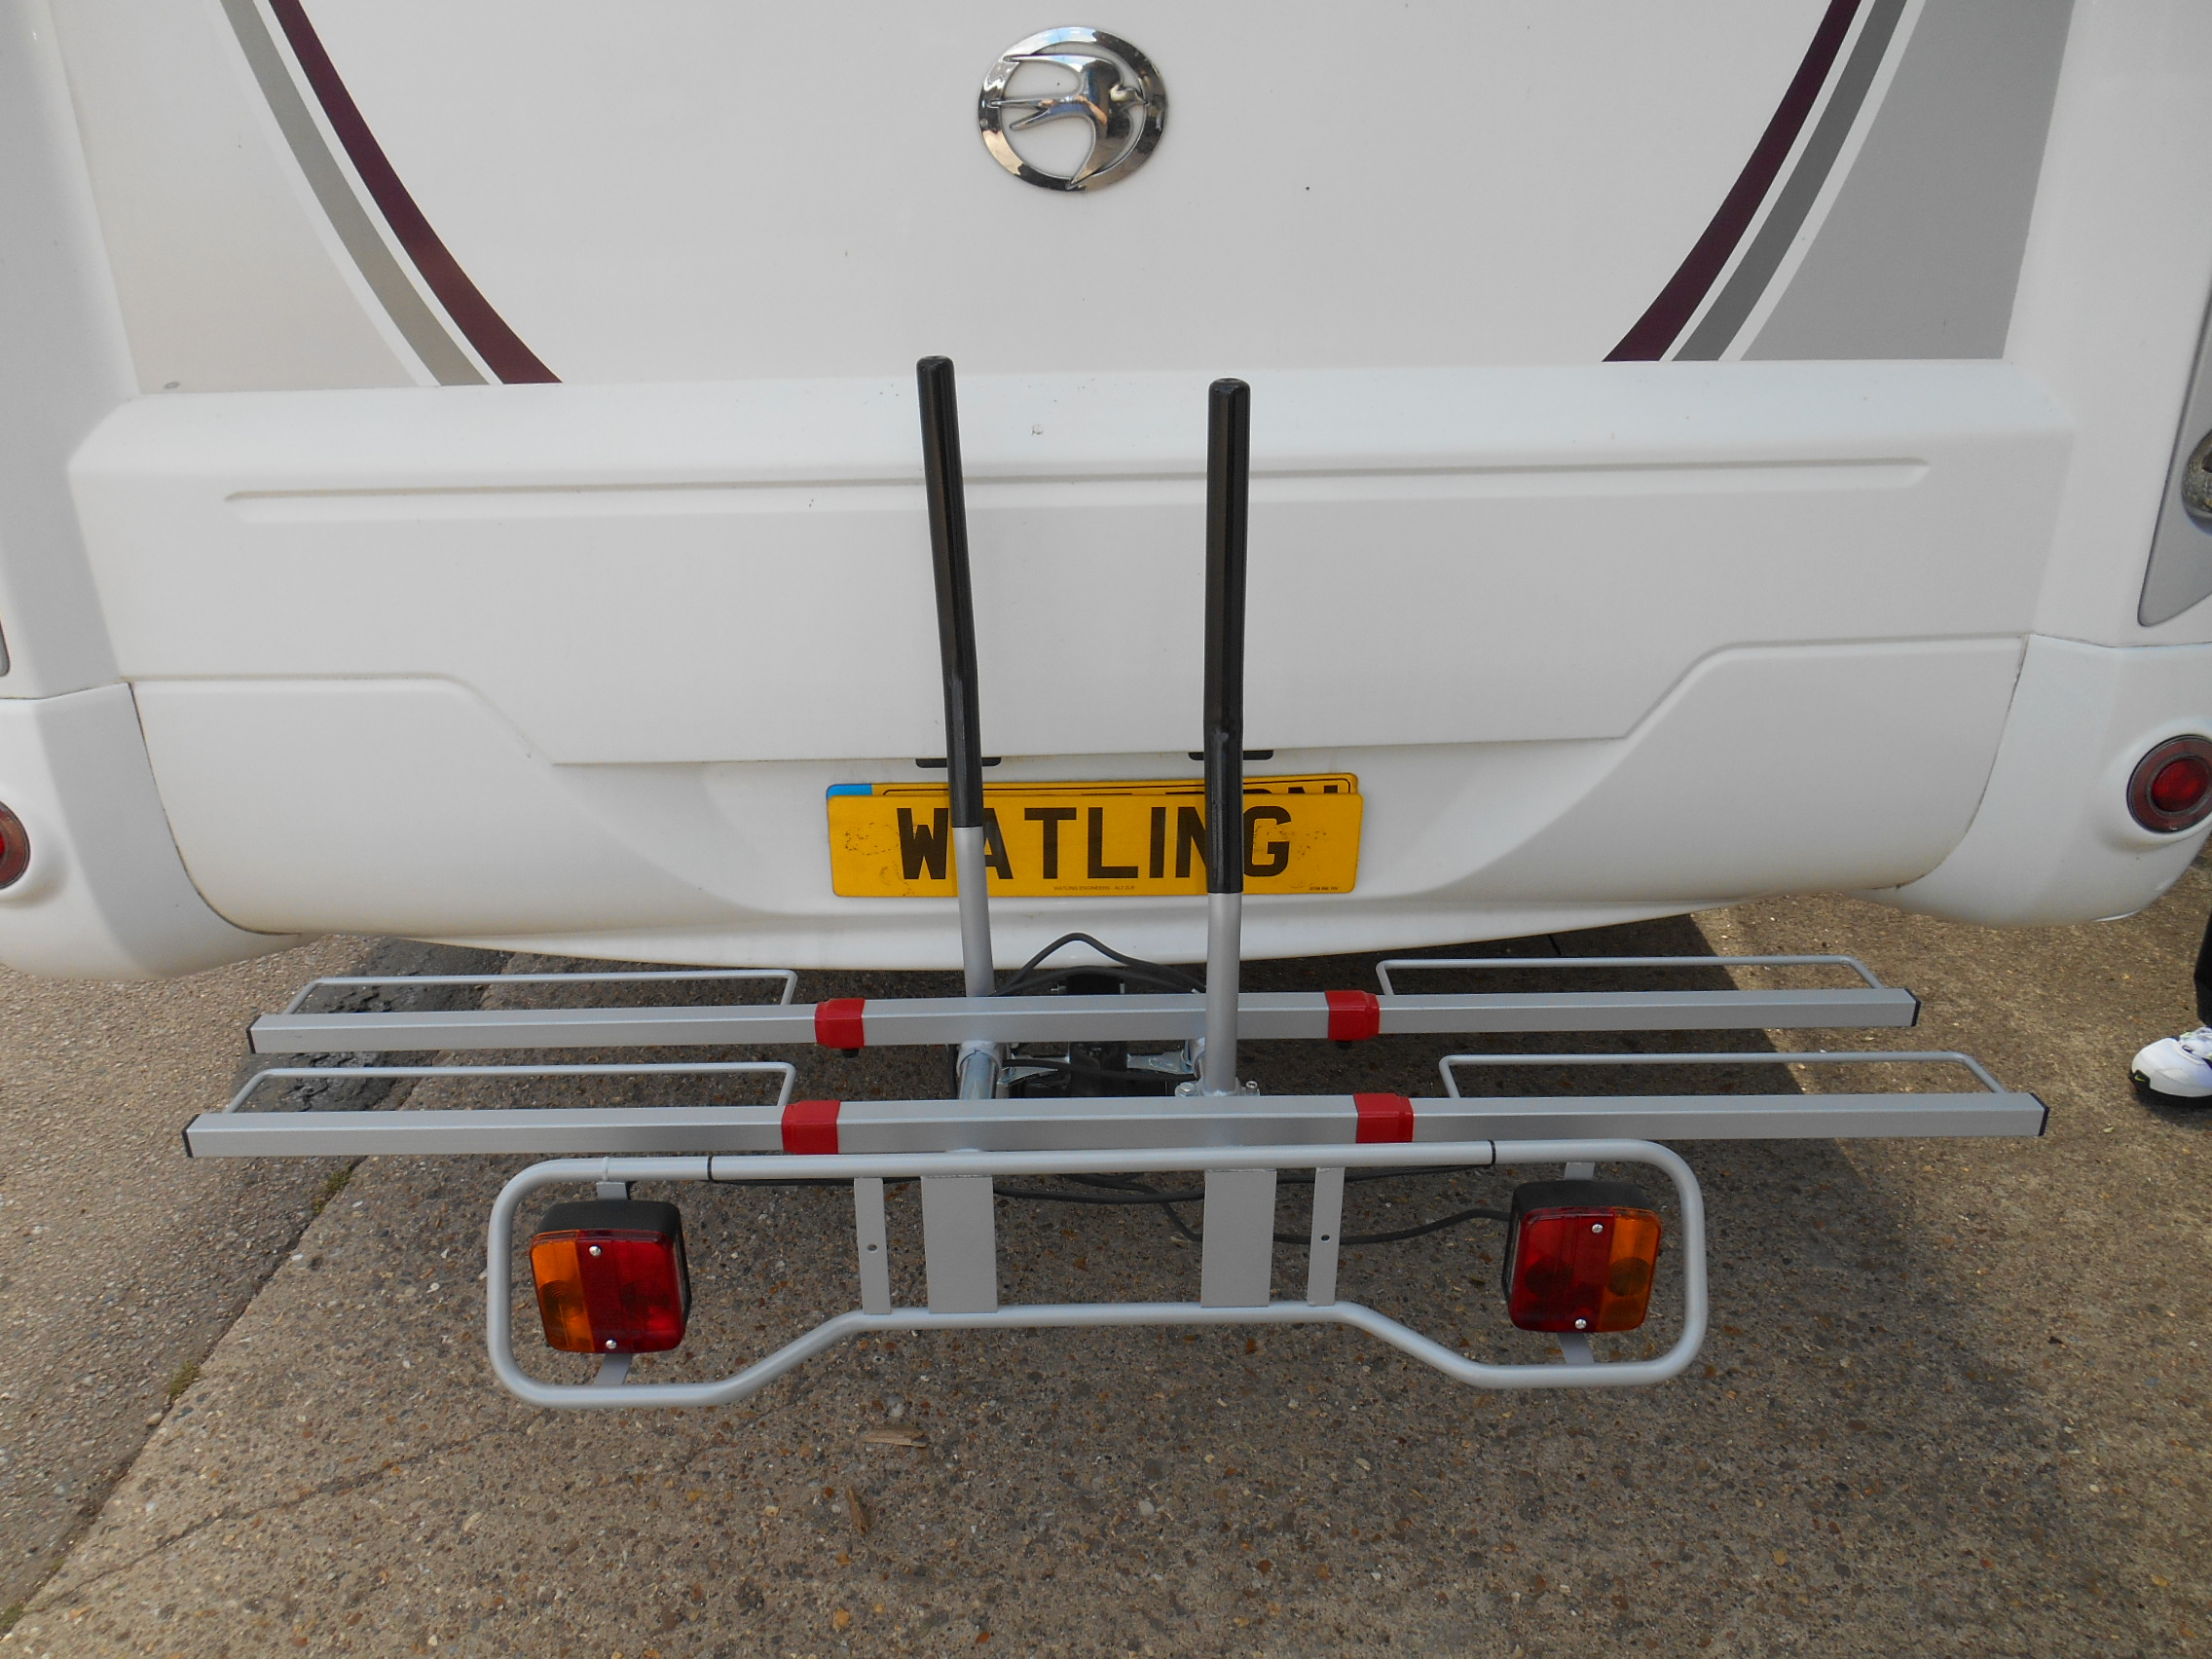 Atera Strada DL3 towbar clearance issues